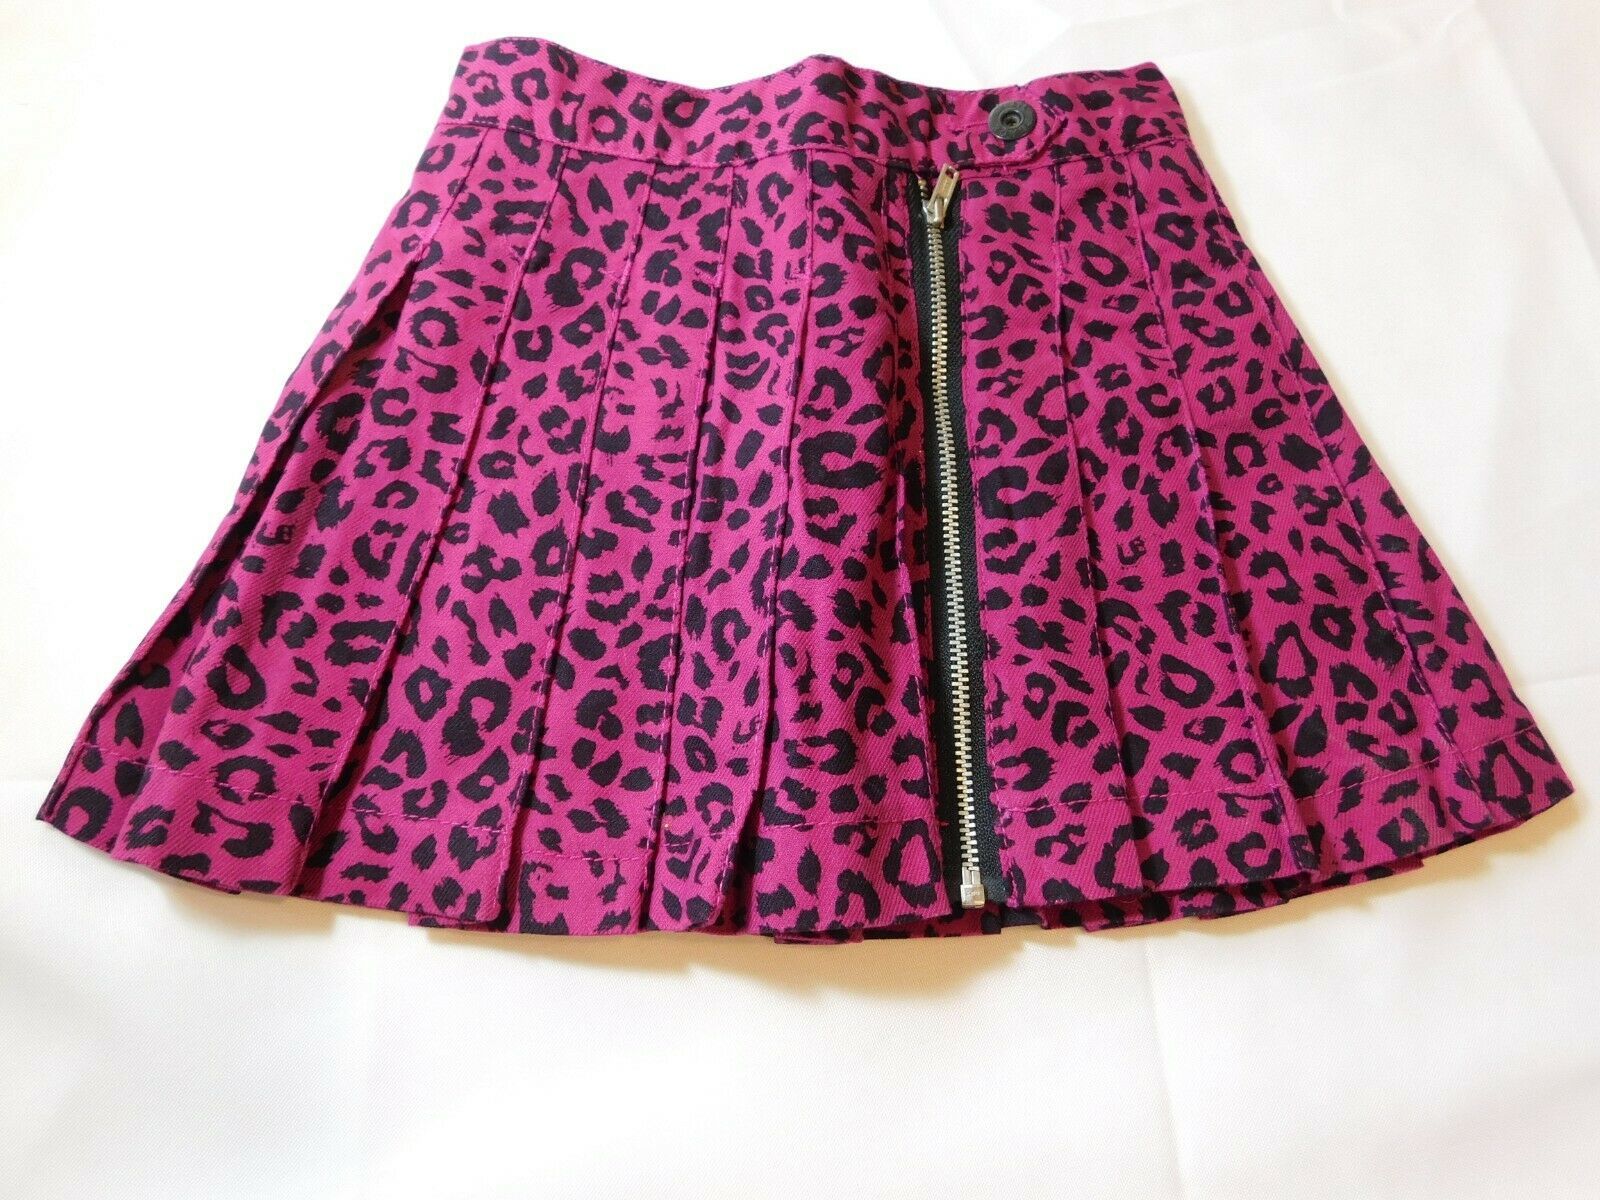 The Children's Place Girl's Youth Skirt Skort Size Variations Cheetah Grape NWT - $15.59